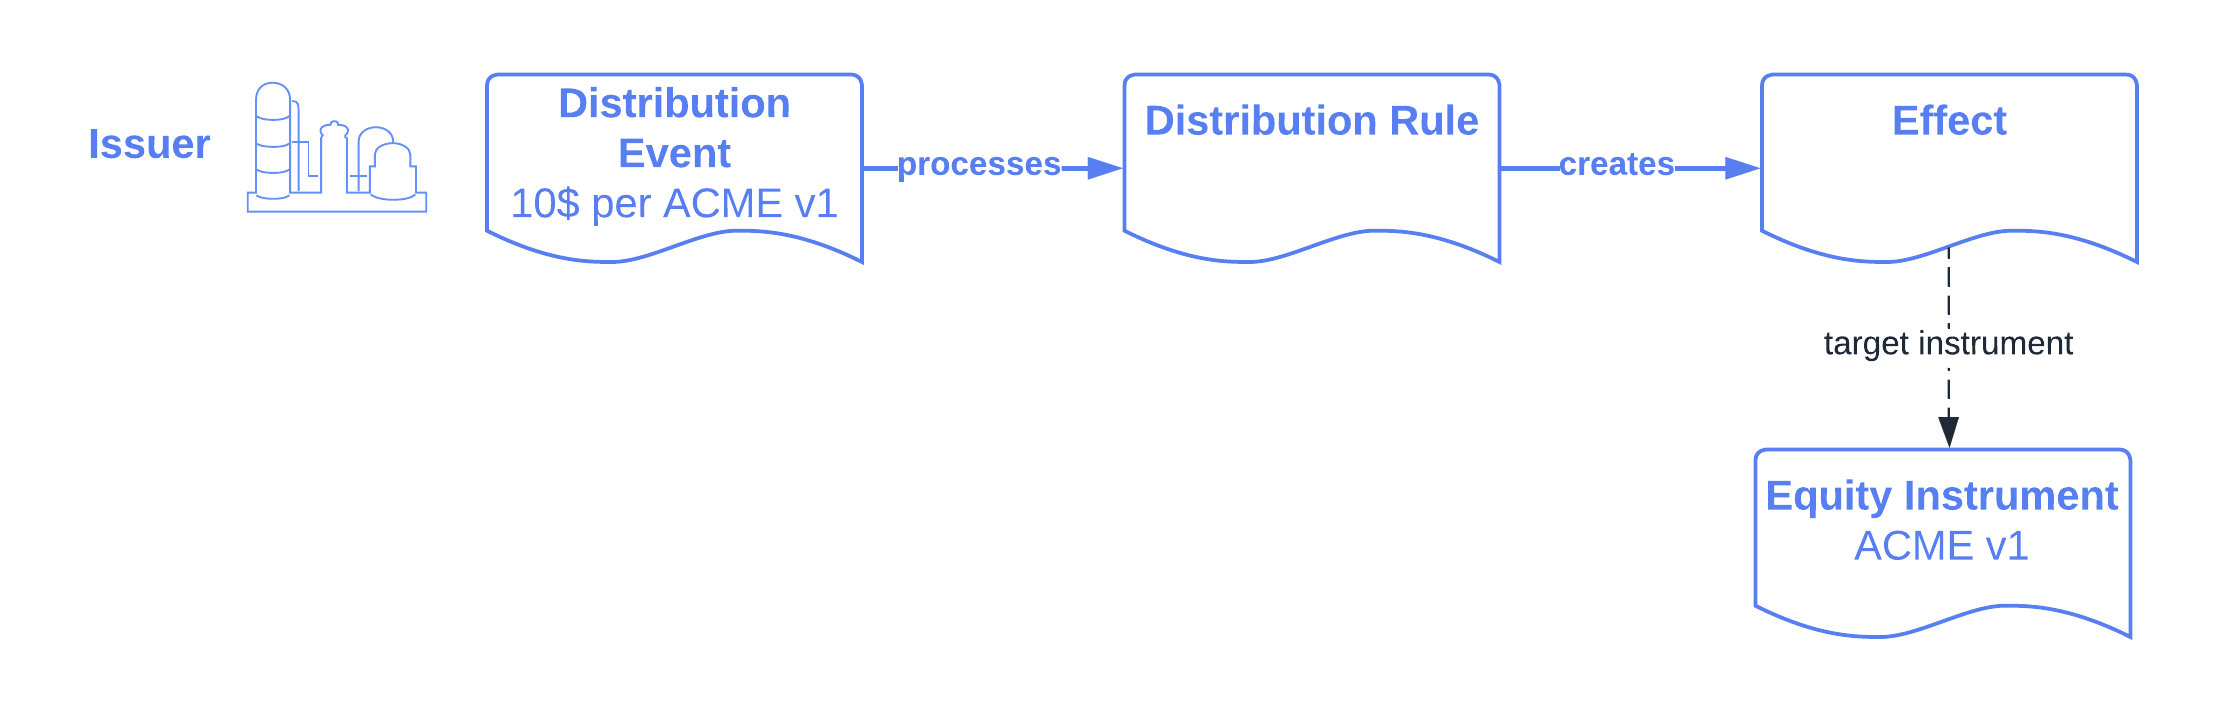 The issuer processes the distribution event through the distribution rule, creating a lifecycle effect. The effect references ACME v1 as a target instrument.